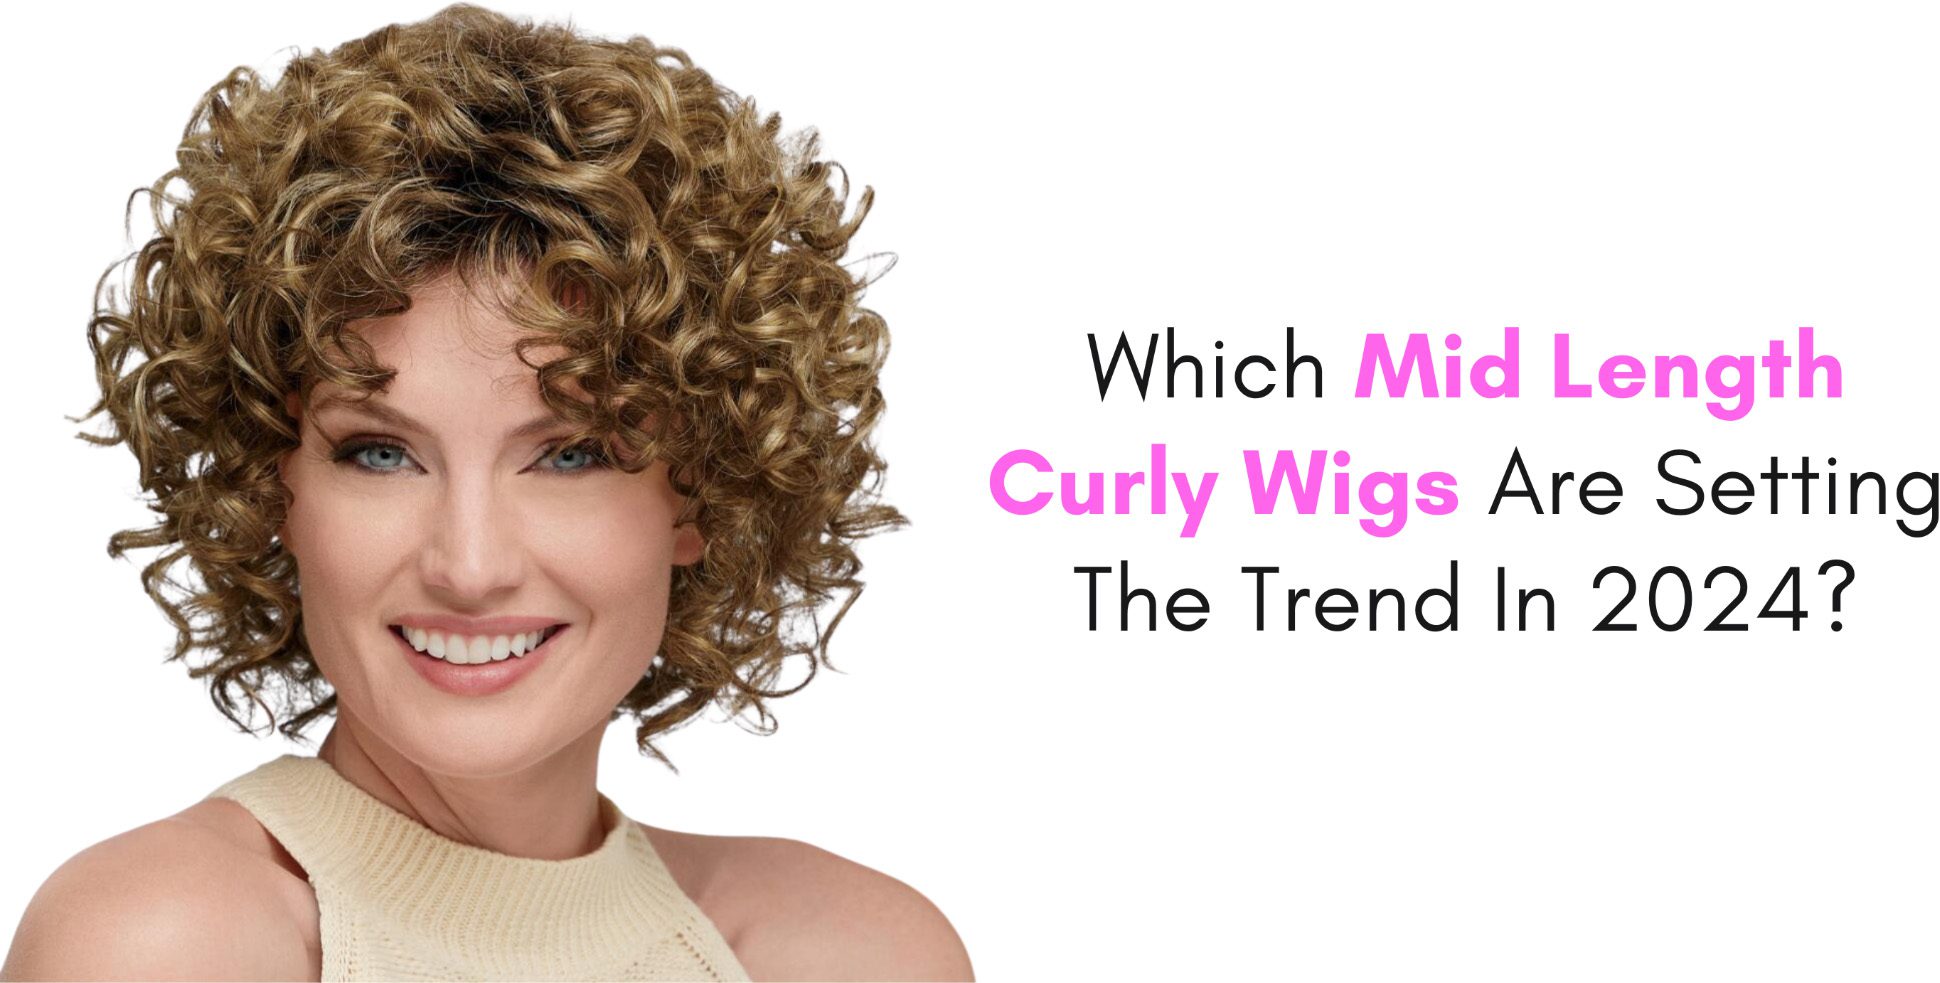 which mid length curly wigs are setting the trend in 2024